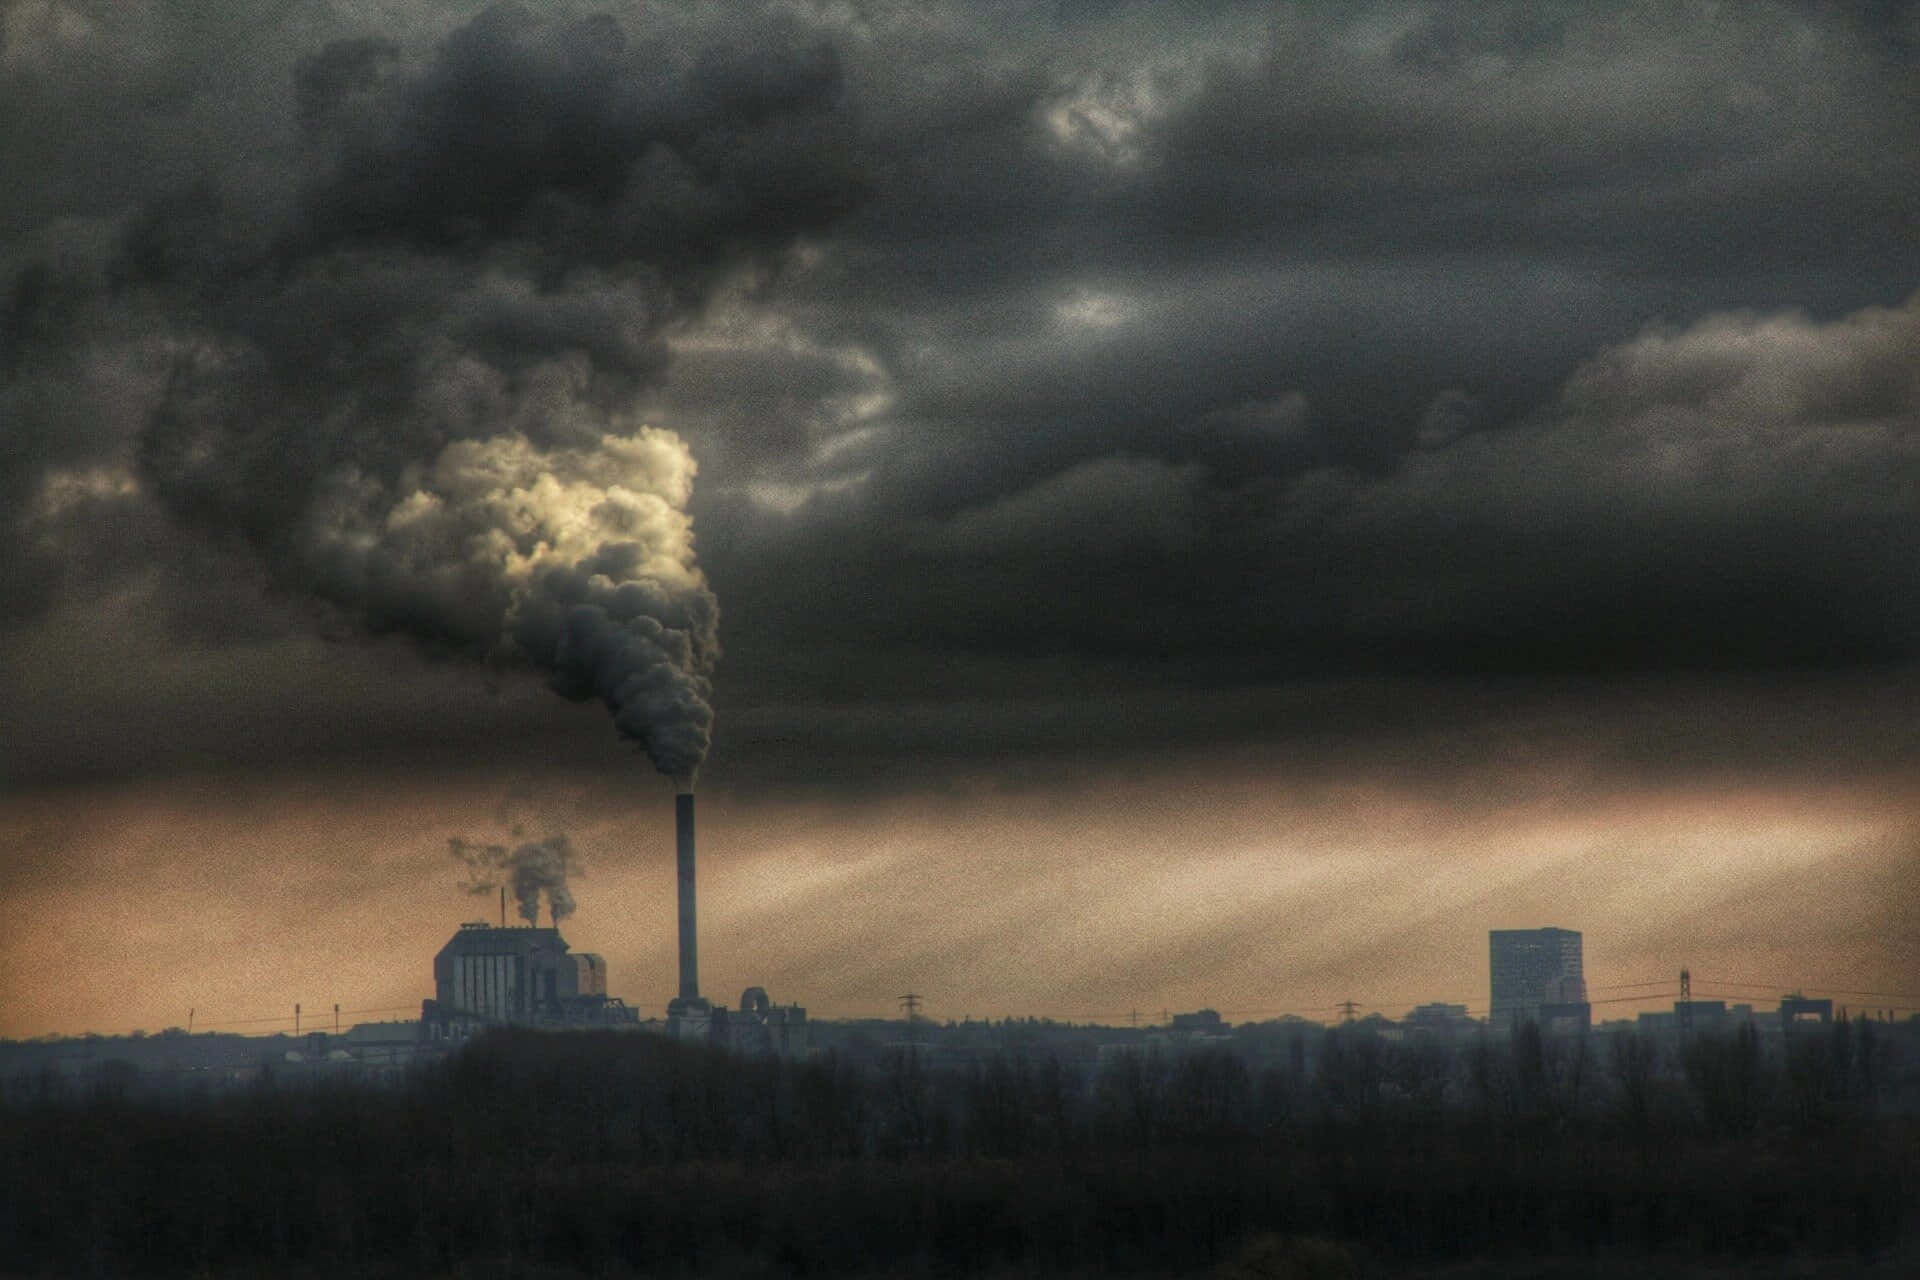 "Today's air pollution has grown to crisis levels -join the fight against it."